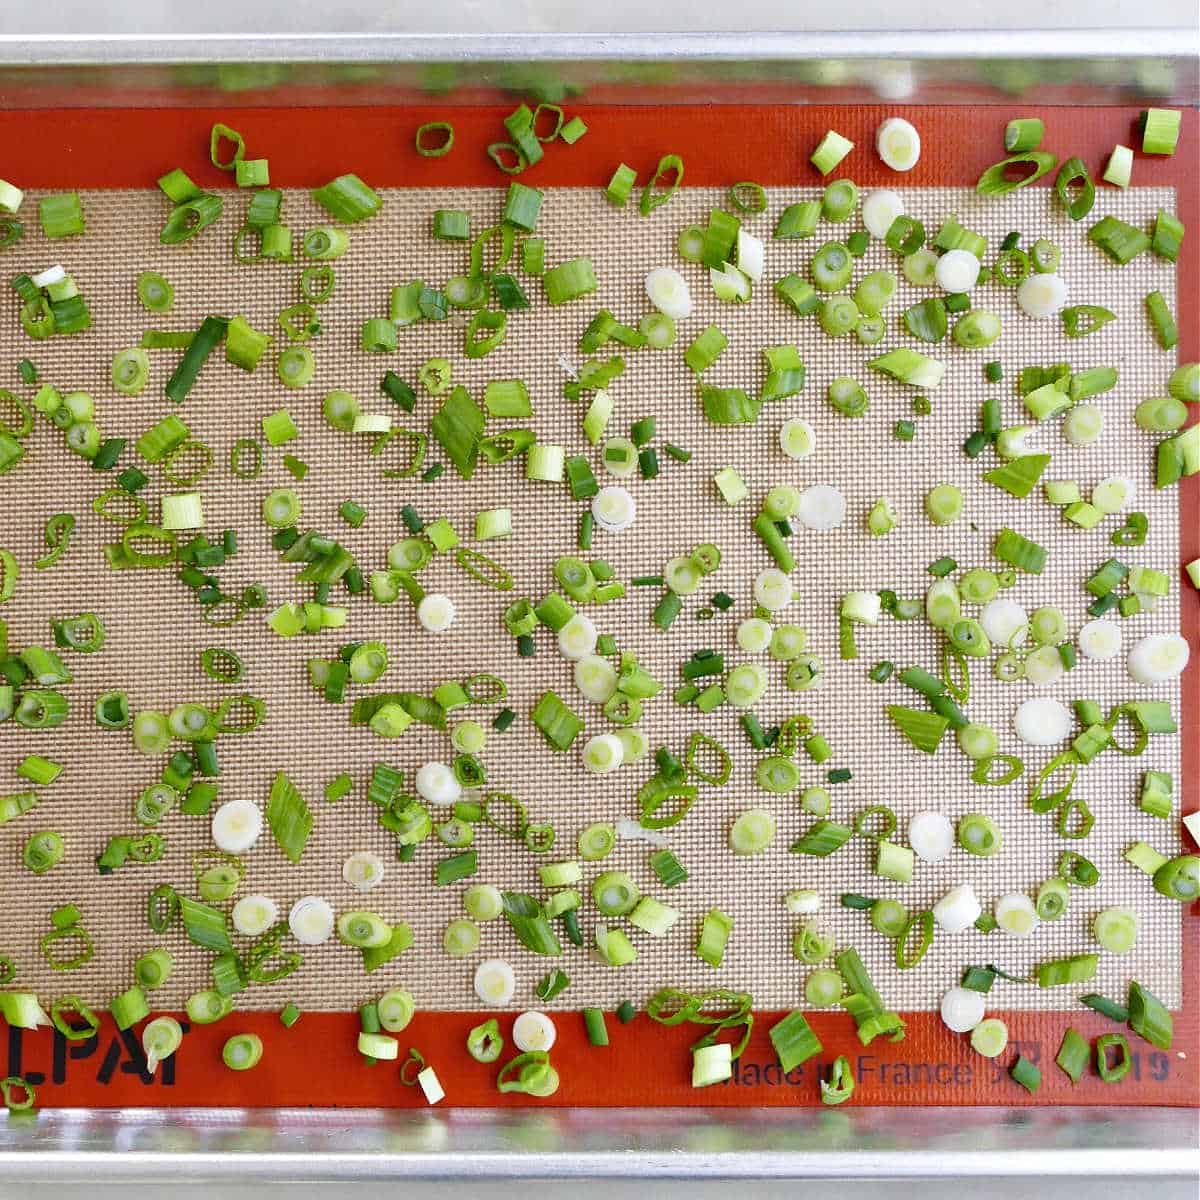 green onions spread out on a lined baking sheet before being frozen